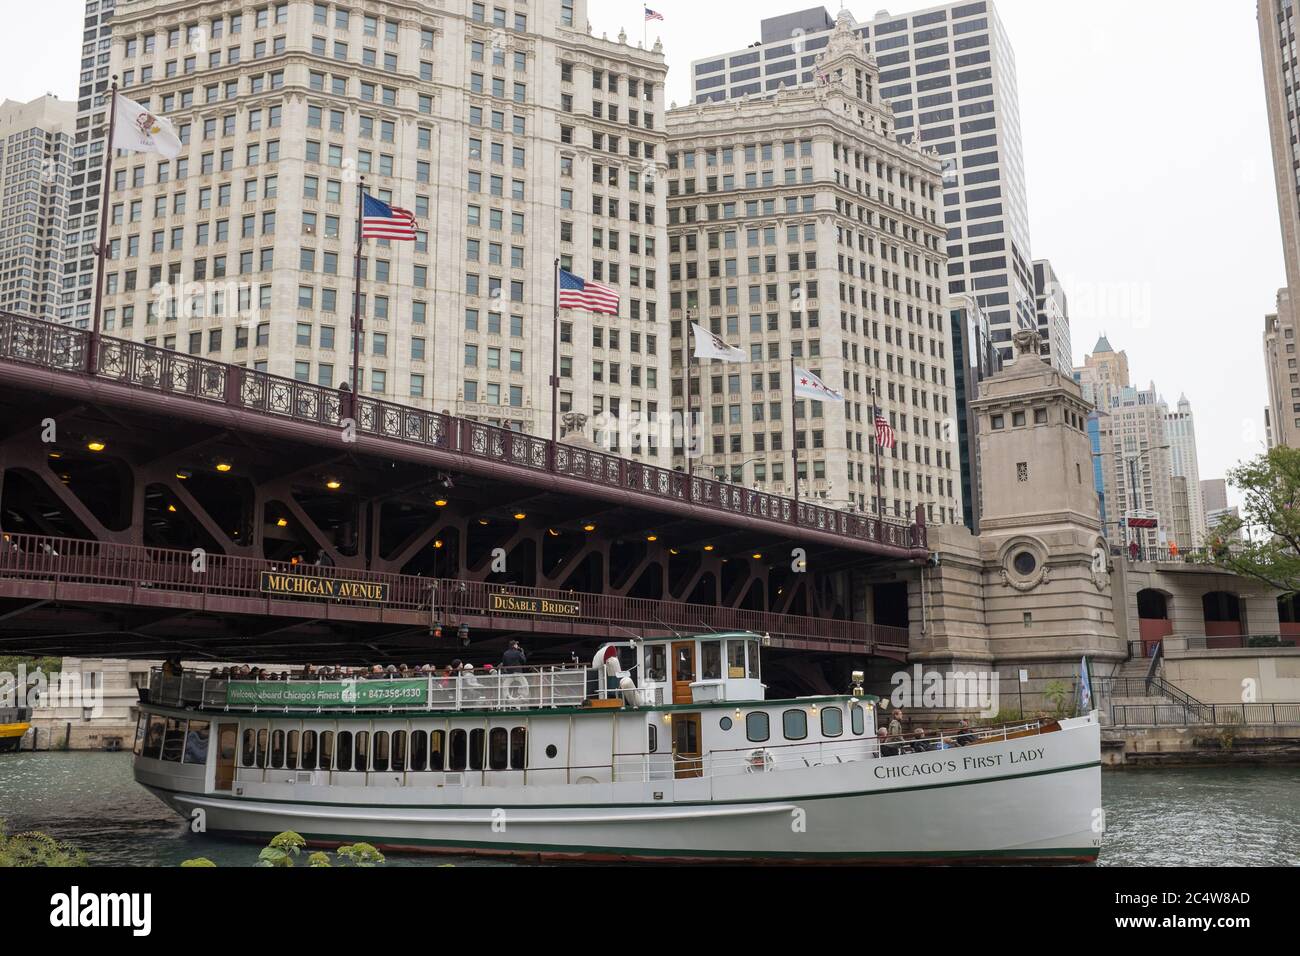 First Lady boat tour passing under Dusable bridge in Chicago, Illinois Stock Photo